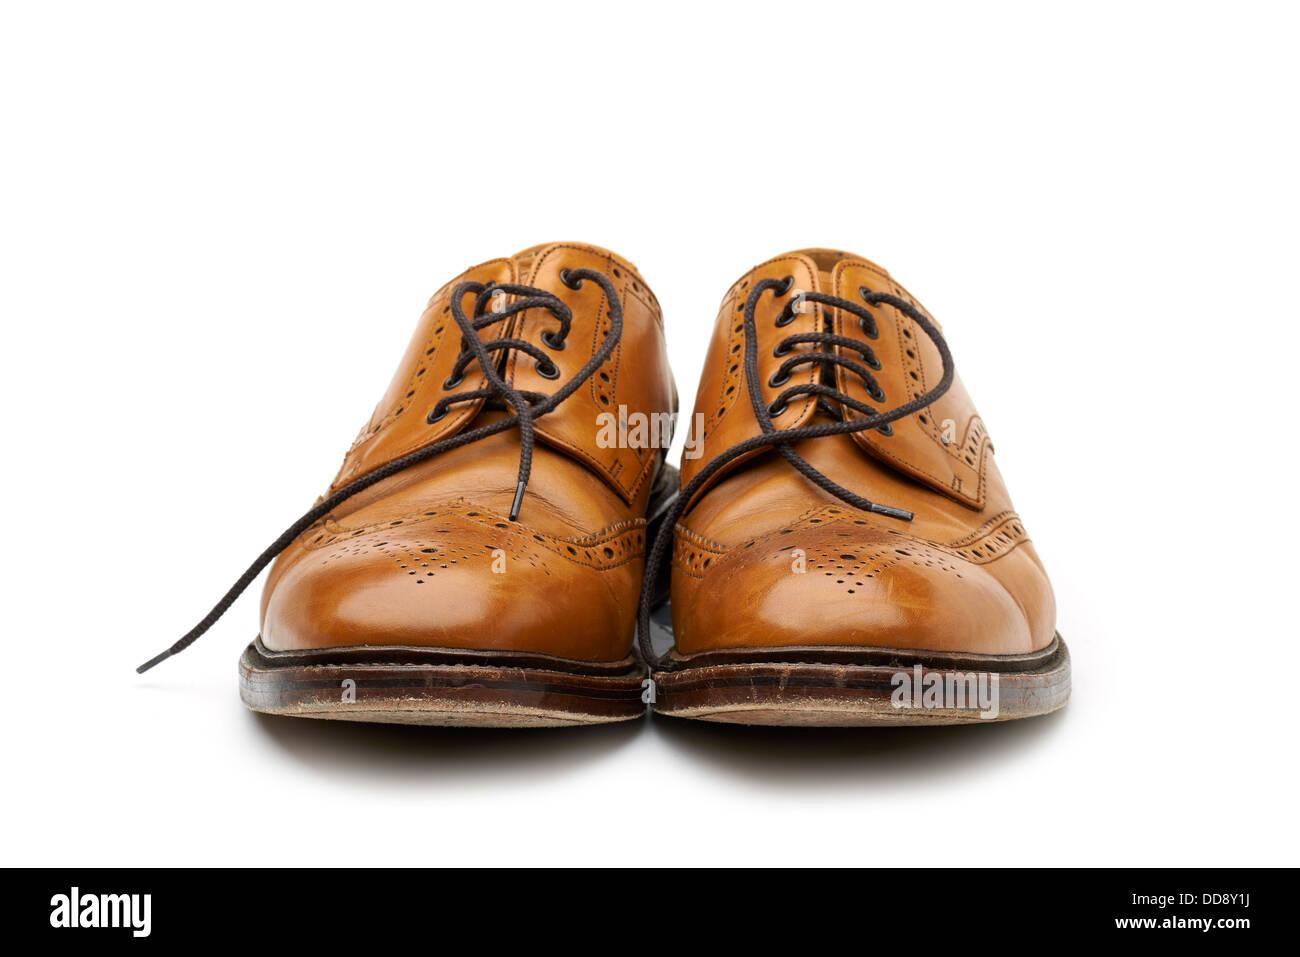 Loake shoes Brogues tan Classic english shoe style best quality leather  history 1880 old design cut out studio Stock Photo - Alamy